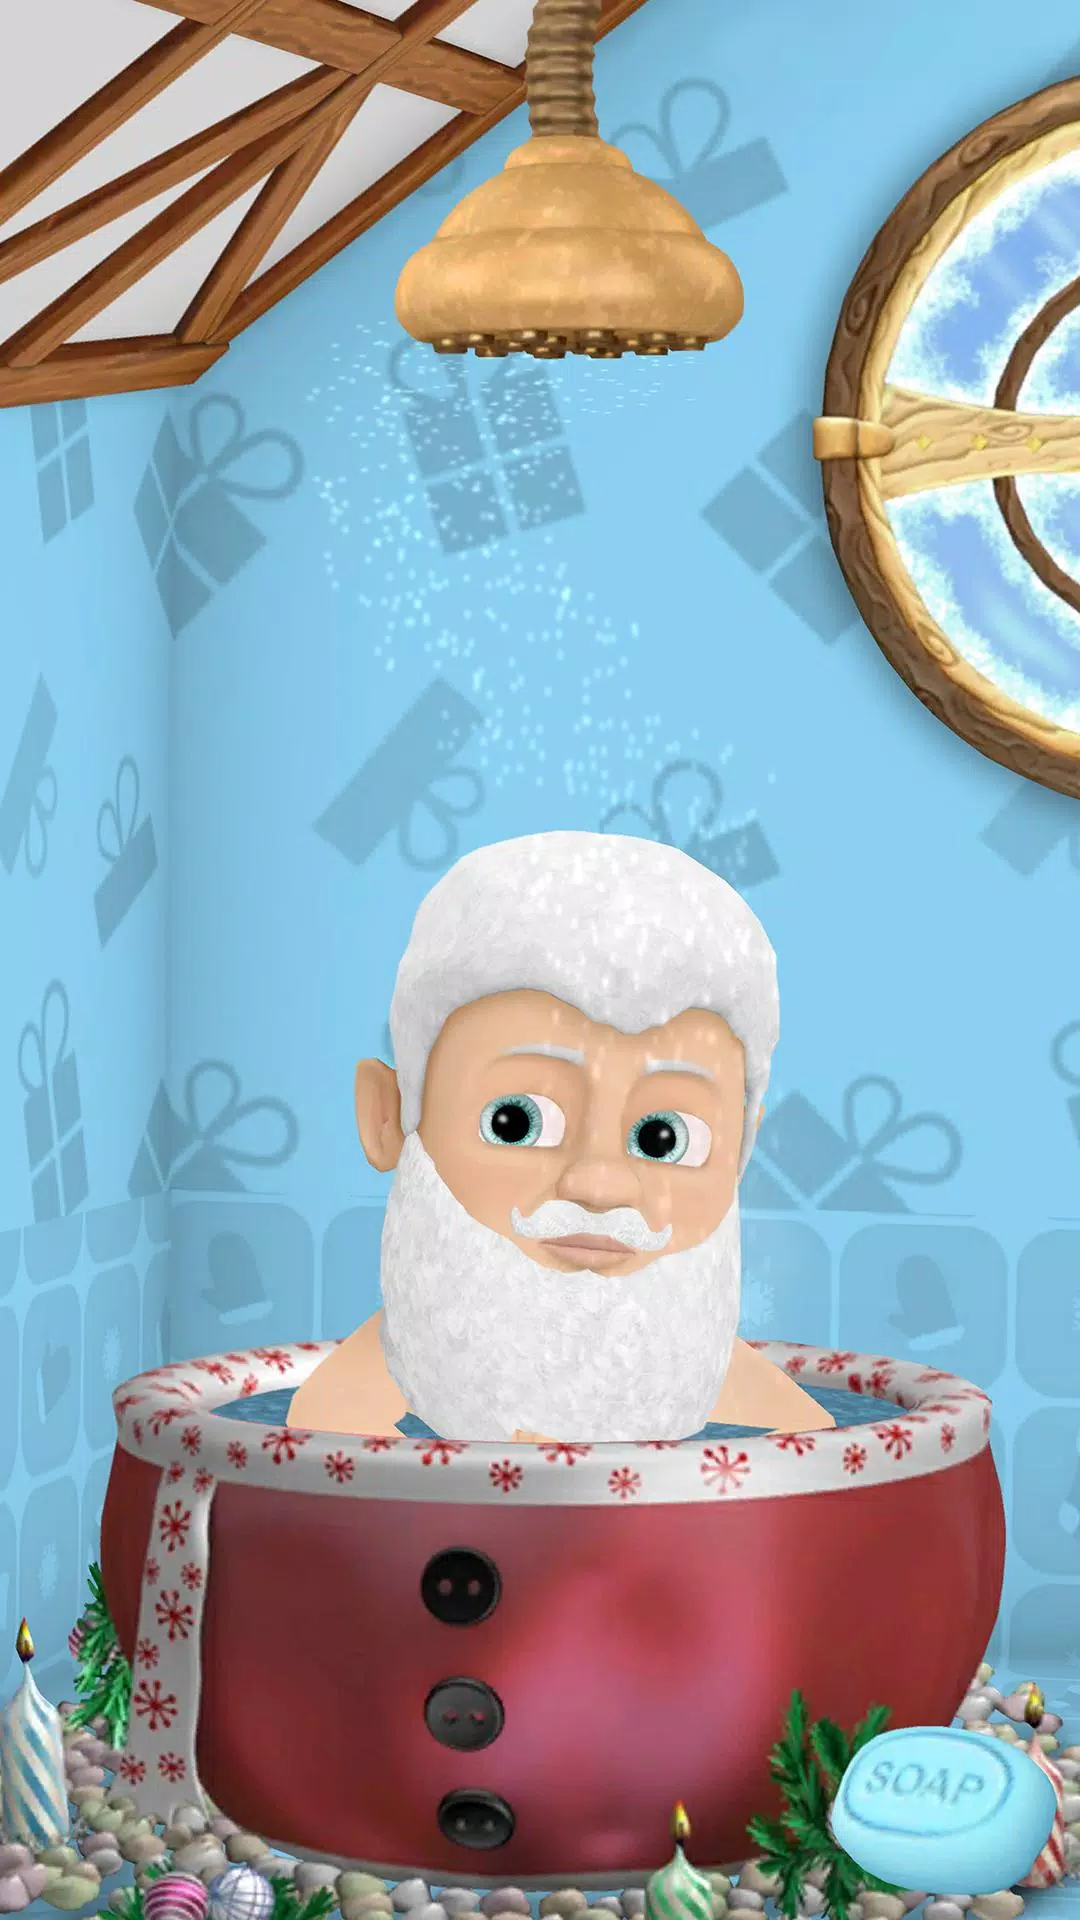 My Santa :) for Android - Download the APK from Uptodown